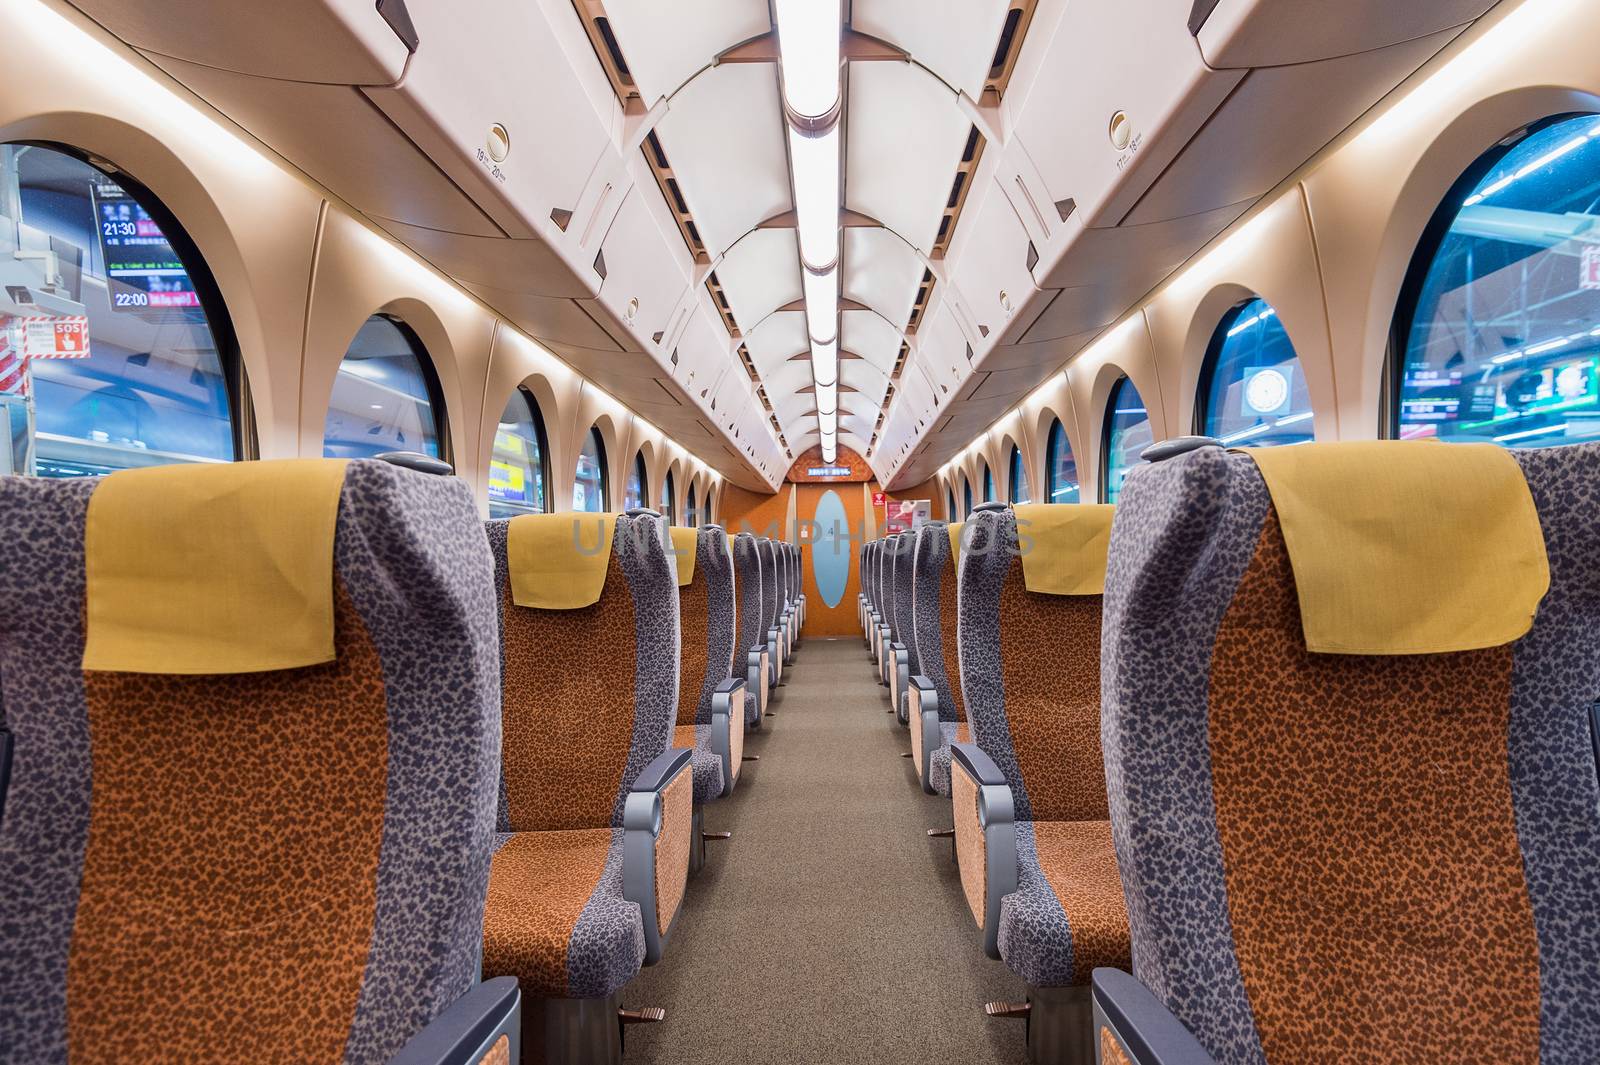 Interior of a train with empty seats. Modern train seats.